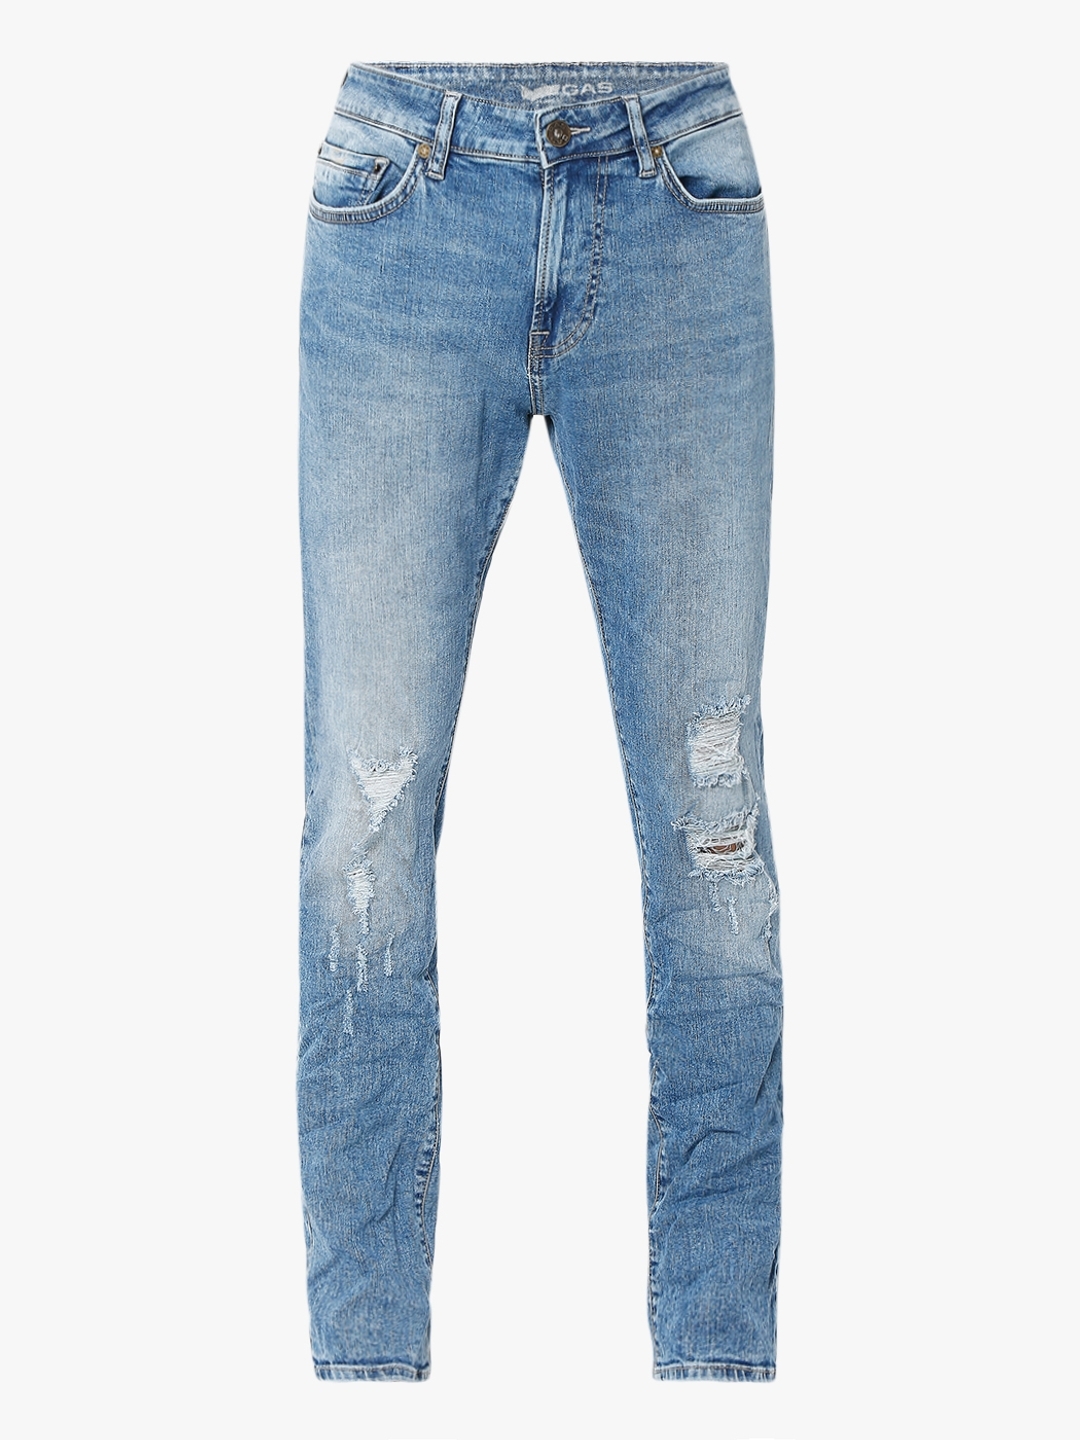 Men's Norton Carrot IN Tapered Fit Jeans